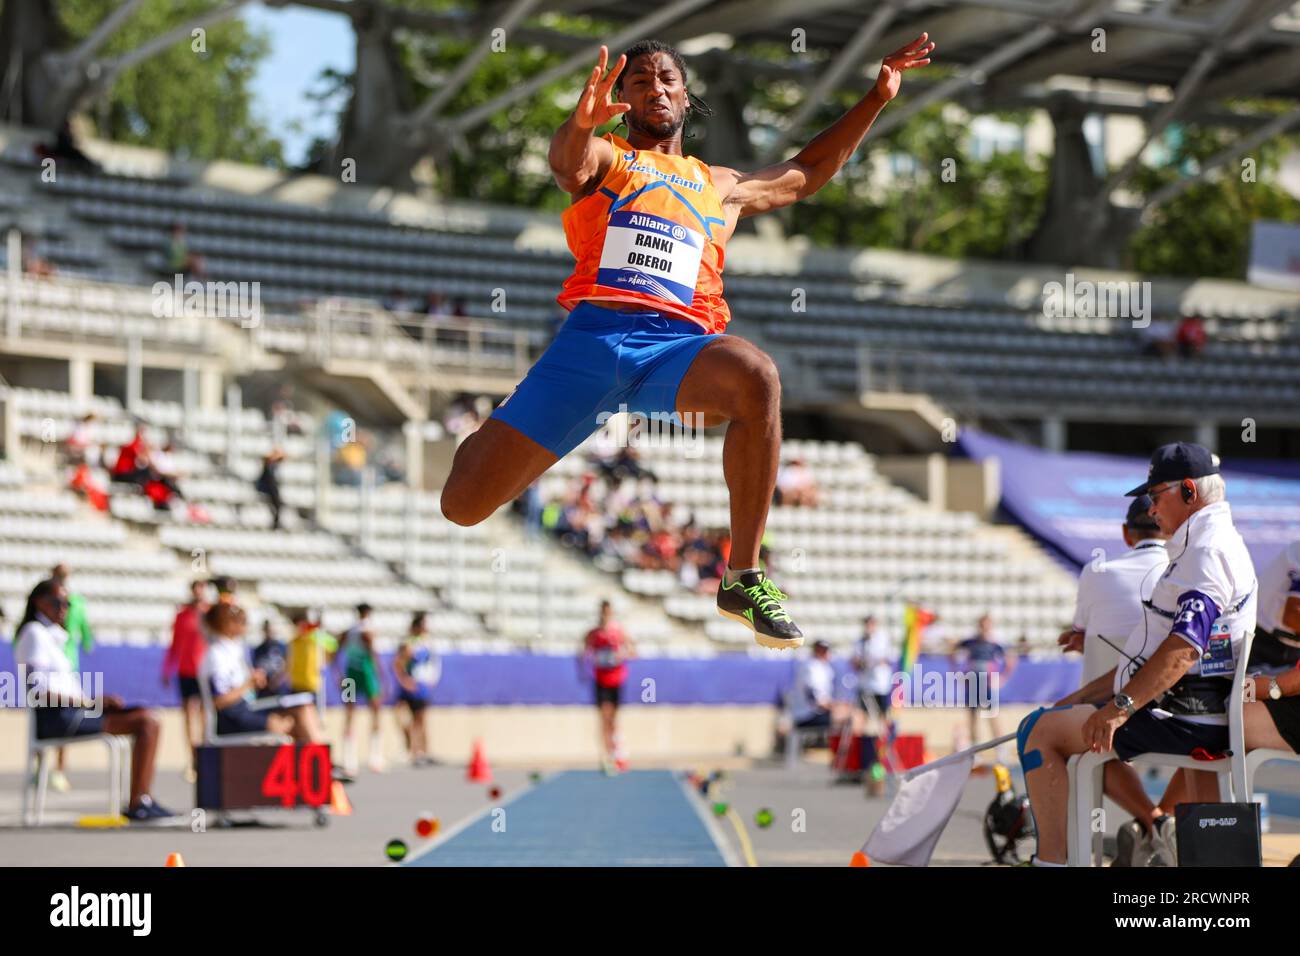 Paris, France. 17th July, 2023. PARIS, FRANCE - JULY 17: Ranki Oberoi of the Netherlands competing in Men's Long Jump T20 Final on Day 10 of the Paris 2023 Para Athletics World Championships at the Stade Charlety on July 17, 2023 in Paris, France (Photo by Marcus Hartmann/BSR Agency) Credit: BSR Agency/Alamy Live News Stock Photo